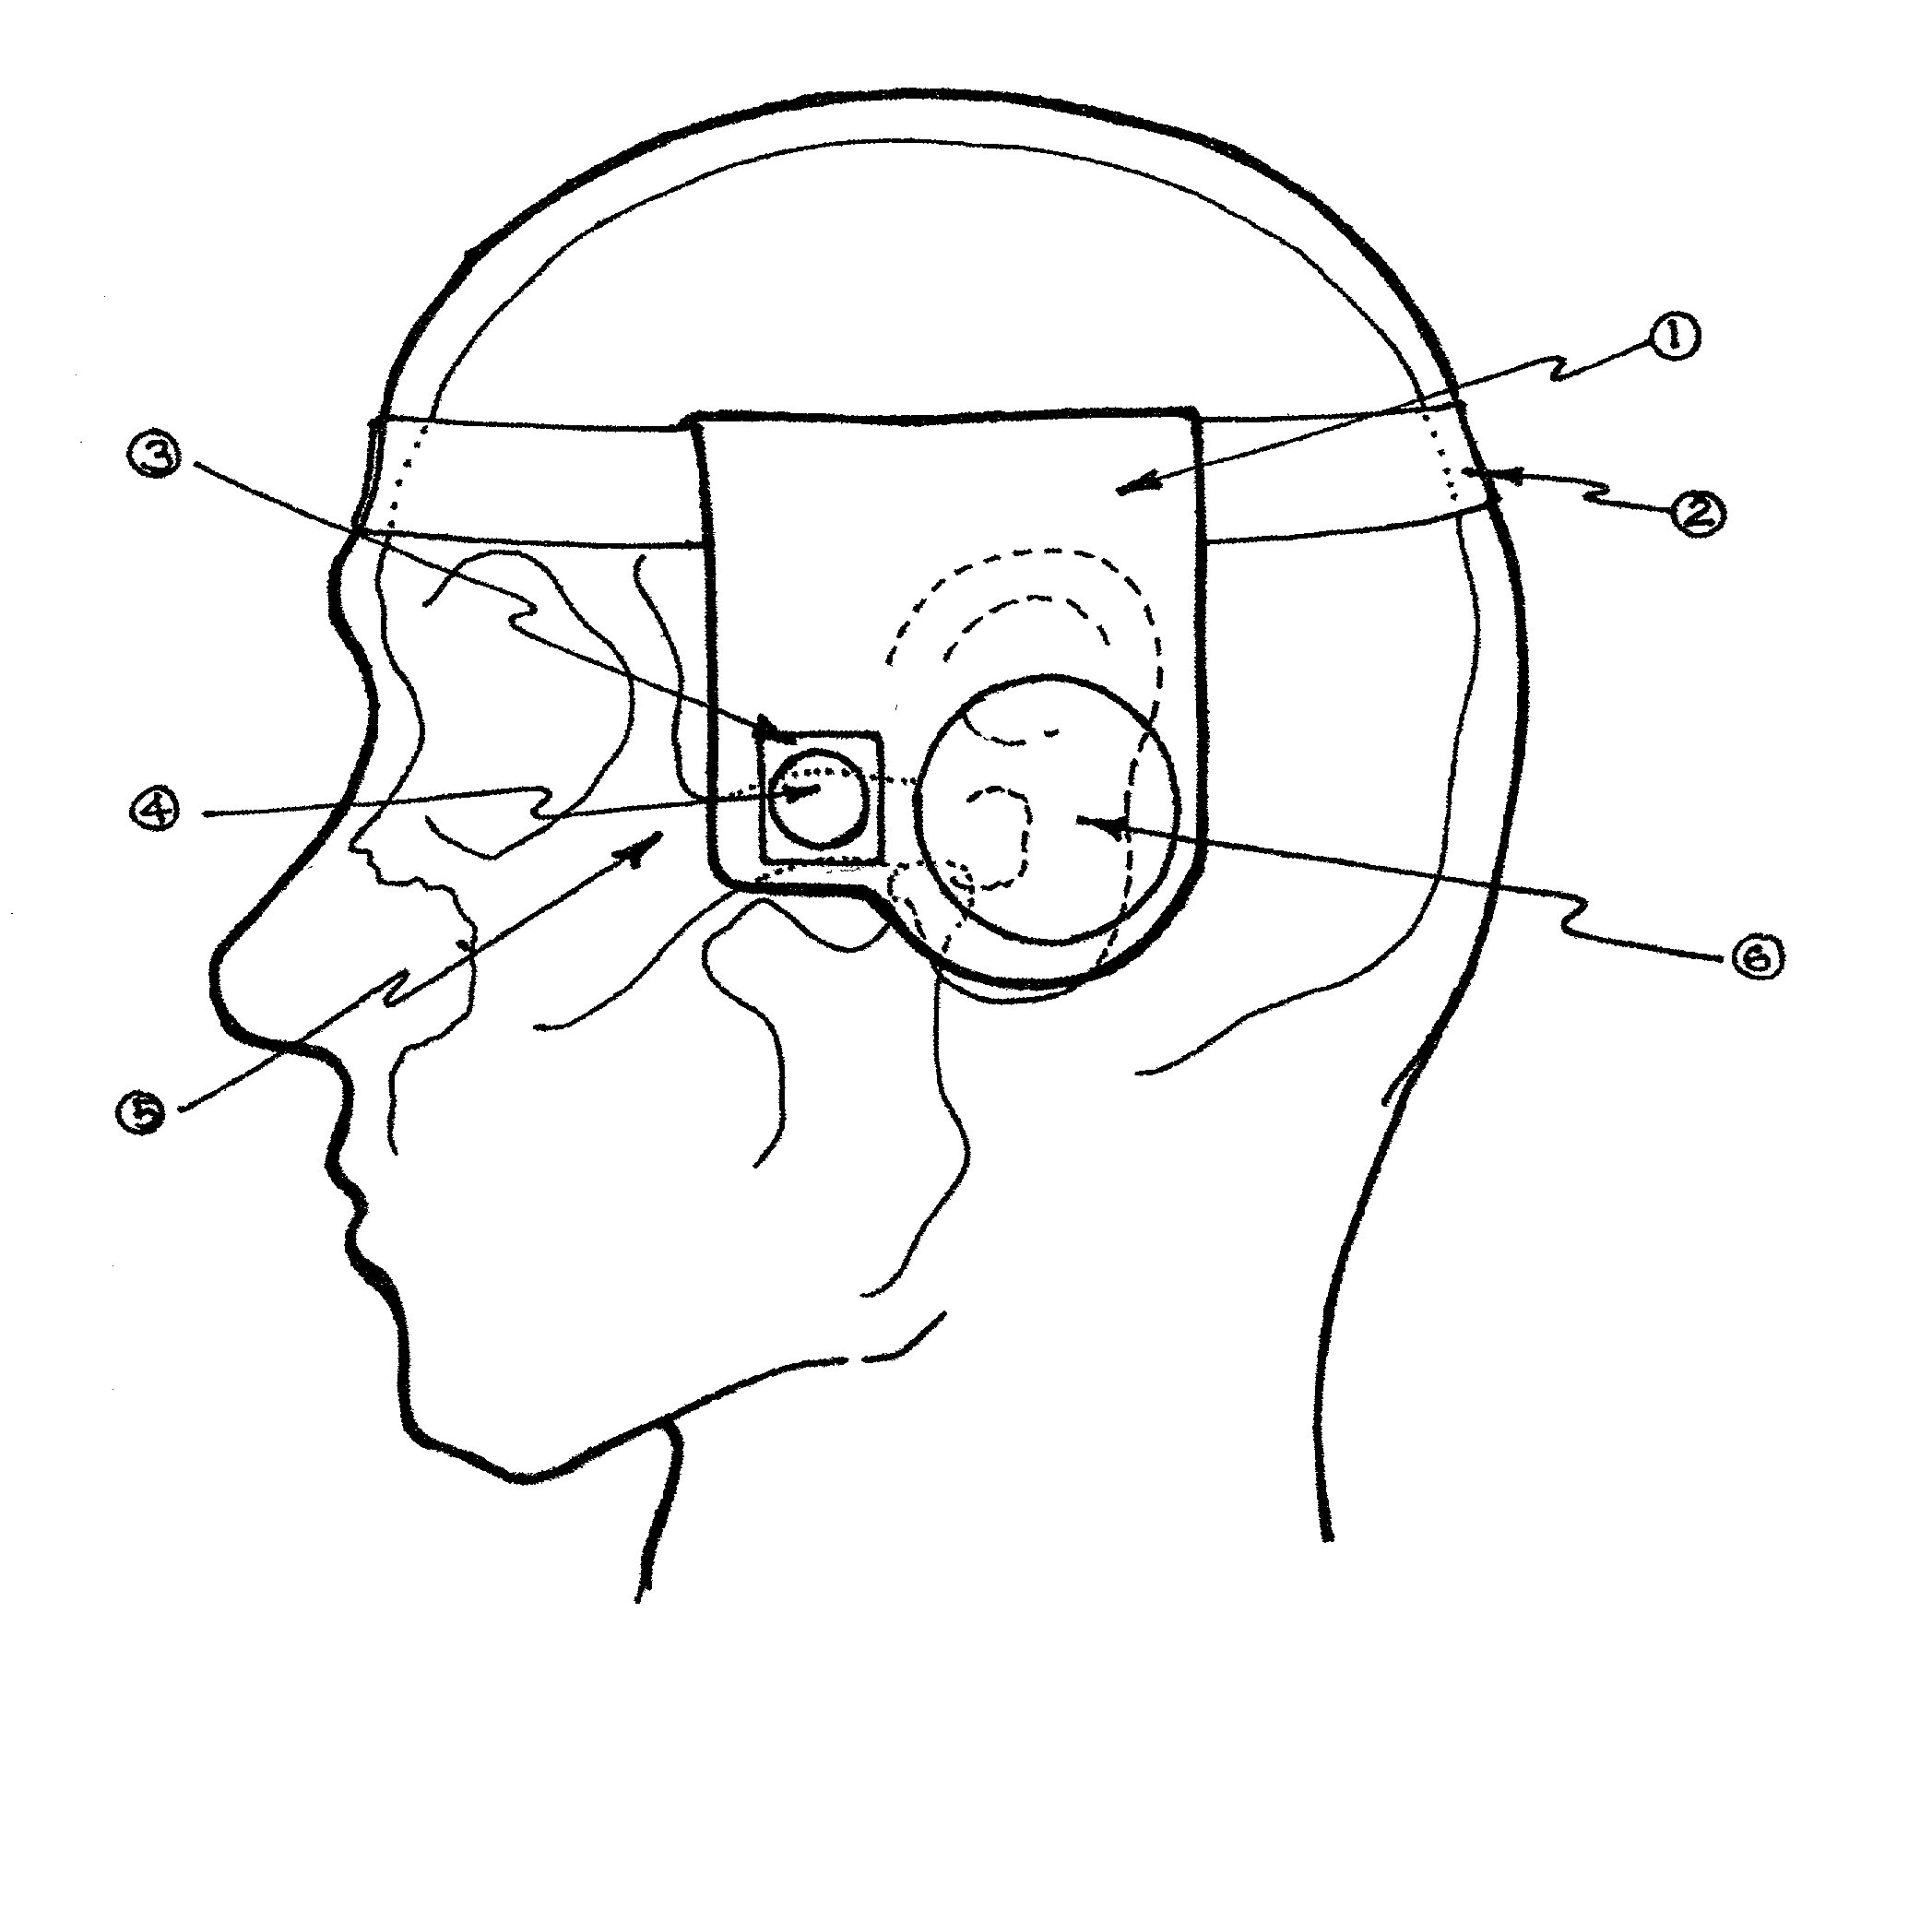 Directional sensors for head-mounted contact microphones